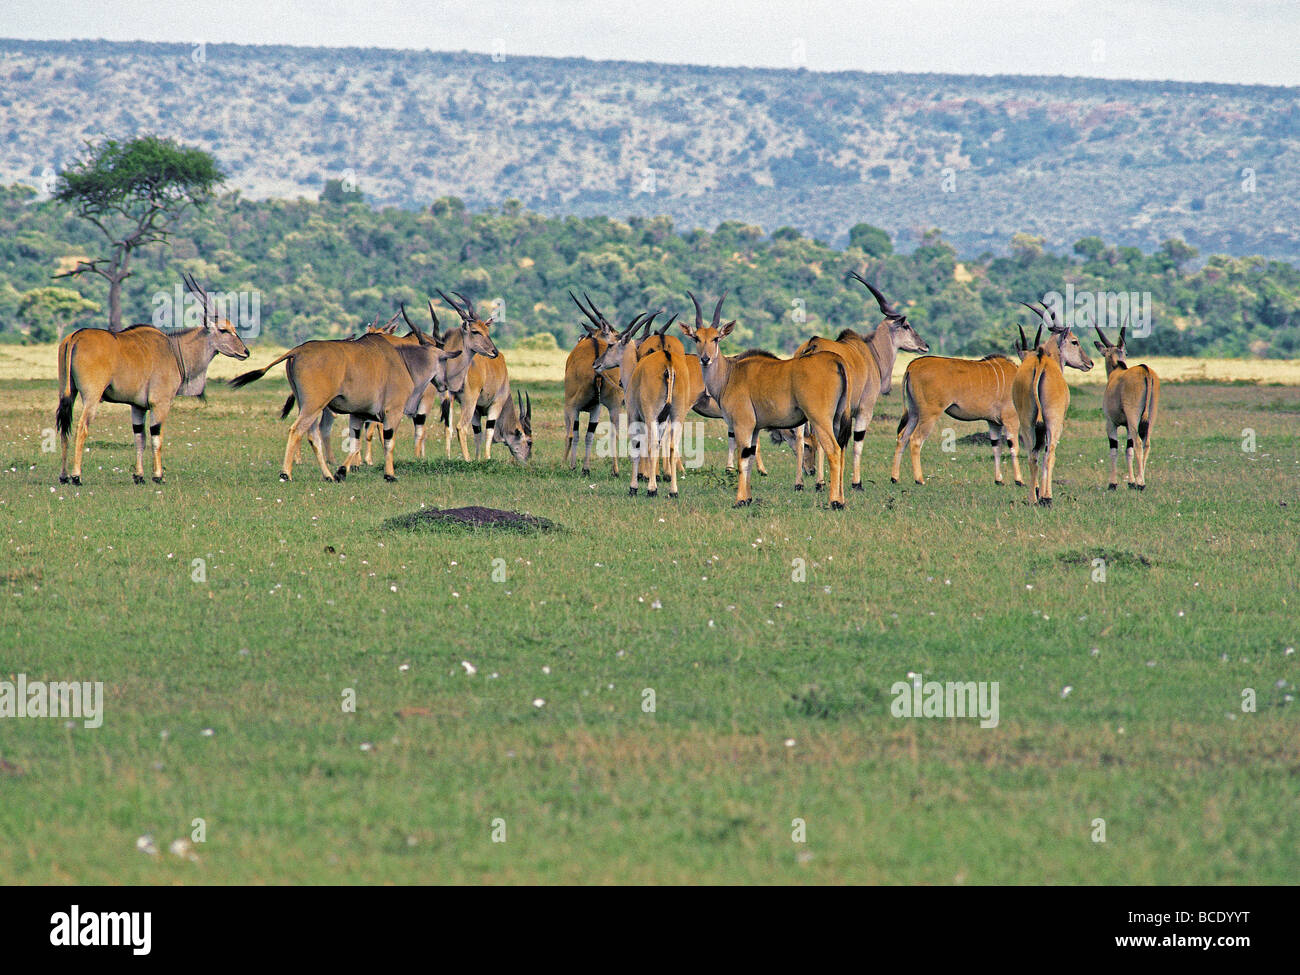 A breeding herd of Eland TAUROTRAGUS ORYX Masai Mara National Reserve Kenya East Africa The herd is made up of young females Stock Photo